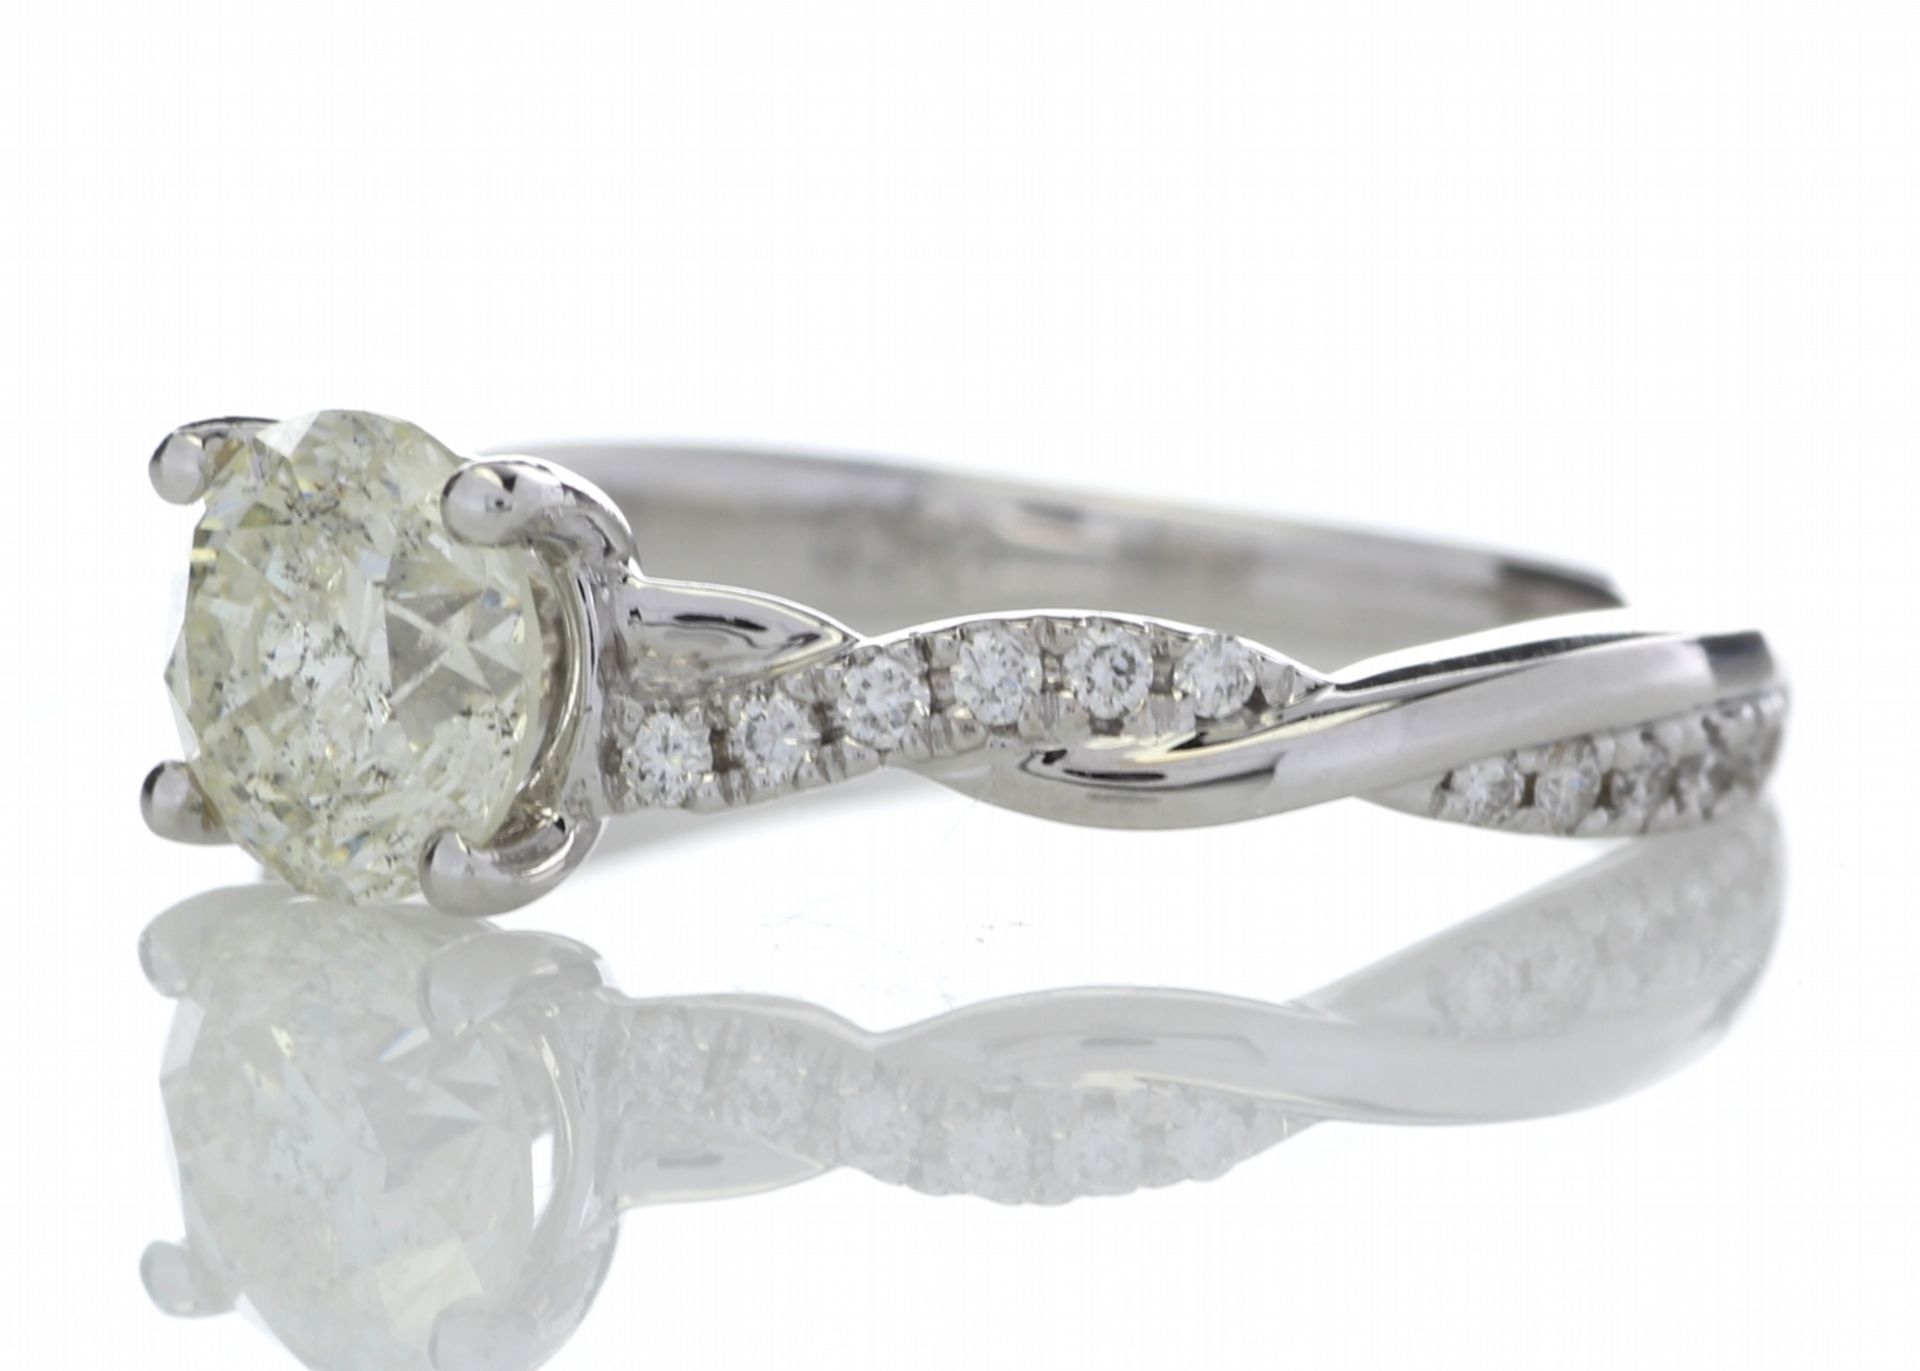 18ct White Gold Single Stone Diamond Ring With Waved Stone Set Shoulders (1.06) 1.22 Carats - Valued - Image 2 of 5